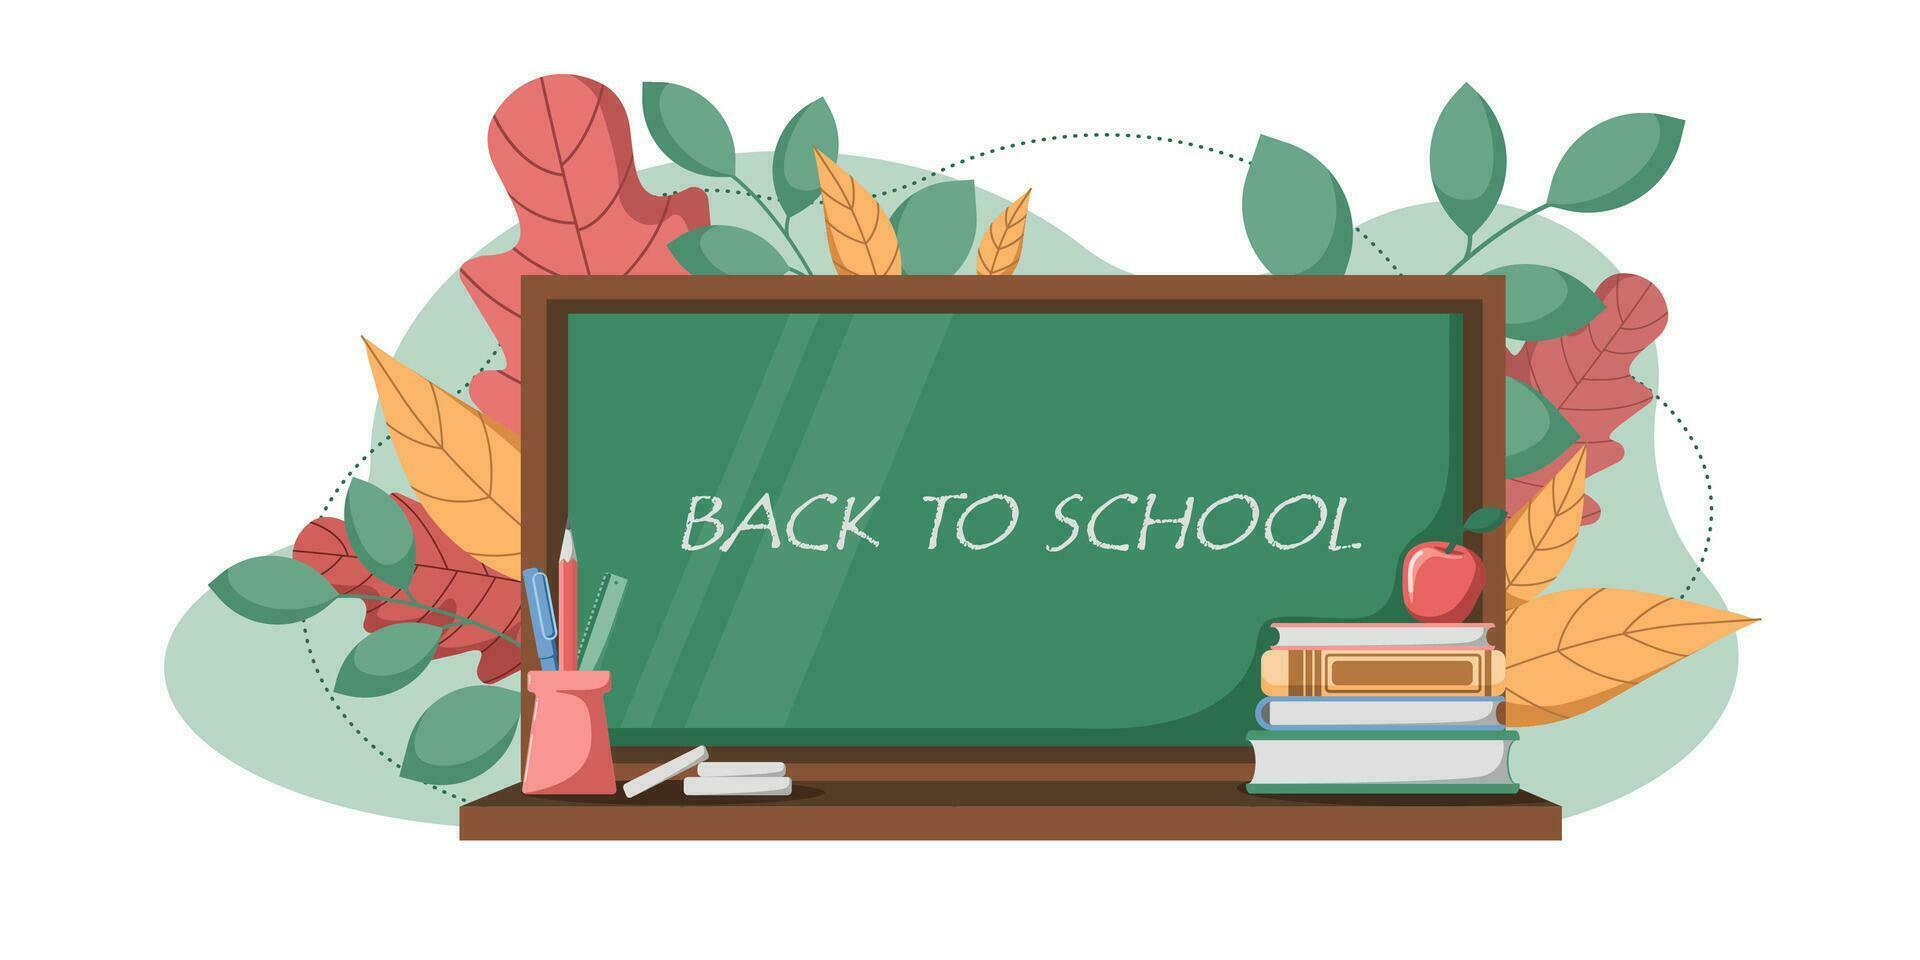 Back to school vector background. School board with education items, supplies and autumn leaves in the back. Educational vector illustration for school start, cards, banners, flyers, invitation